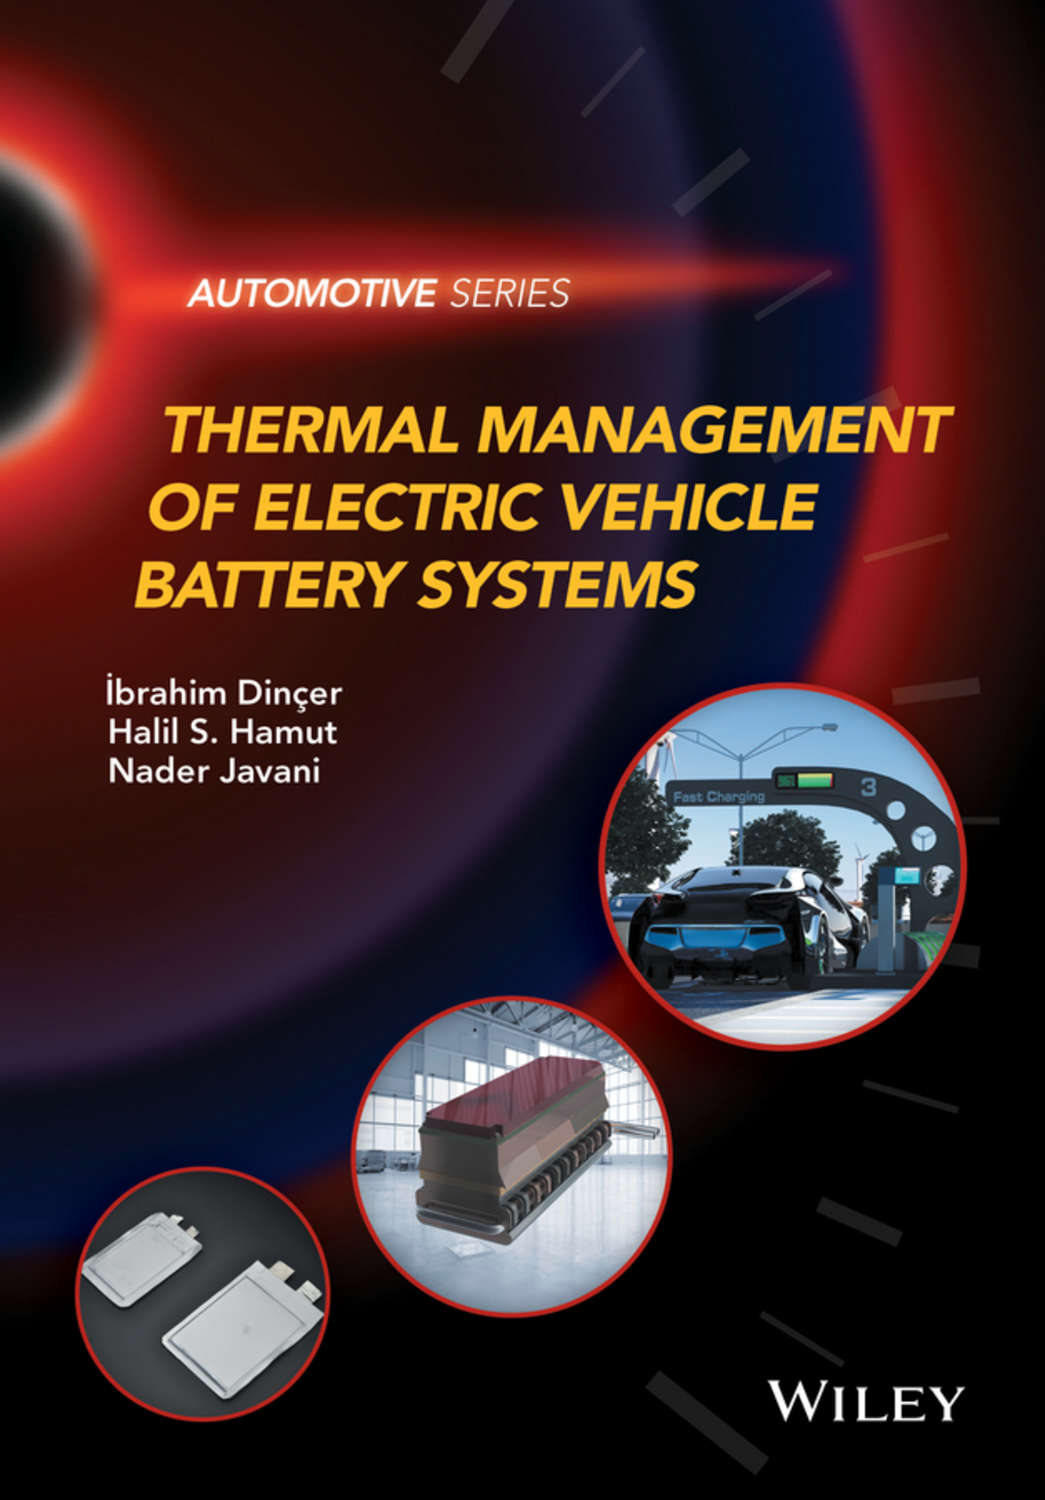 Ibrahim Dincer, Thermal Management of Electric Vehicle Battery Systems